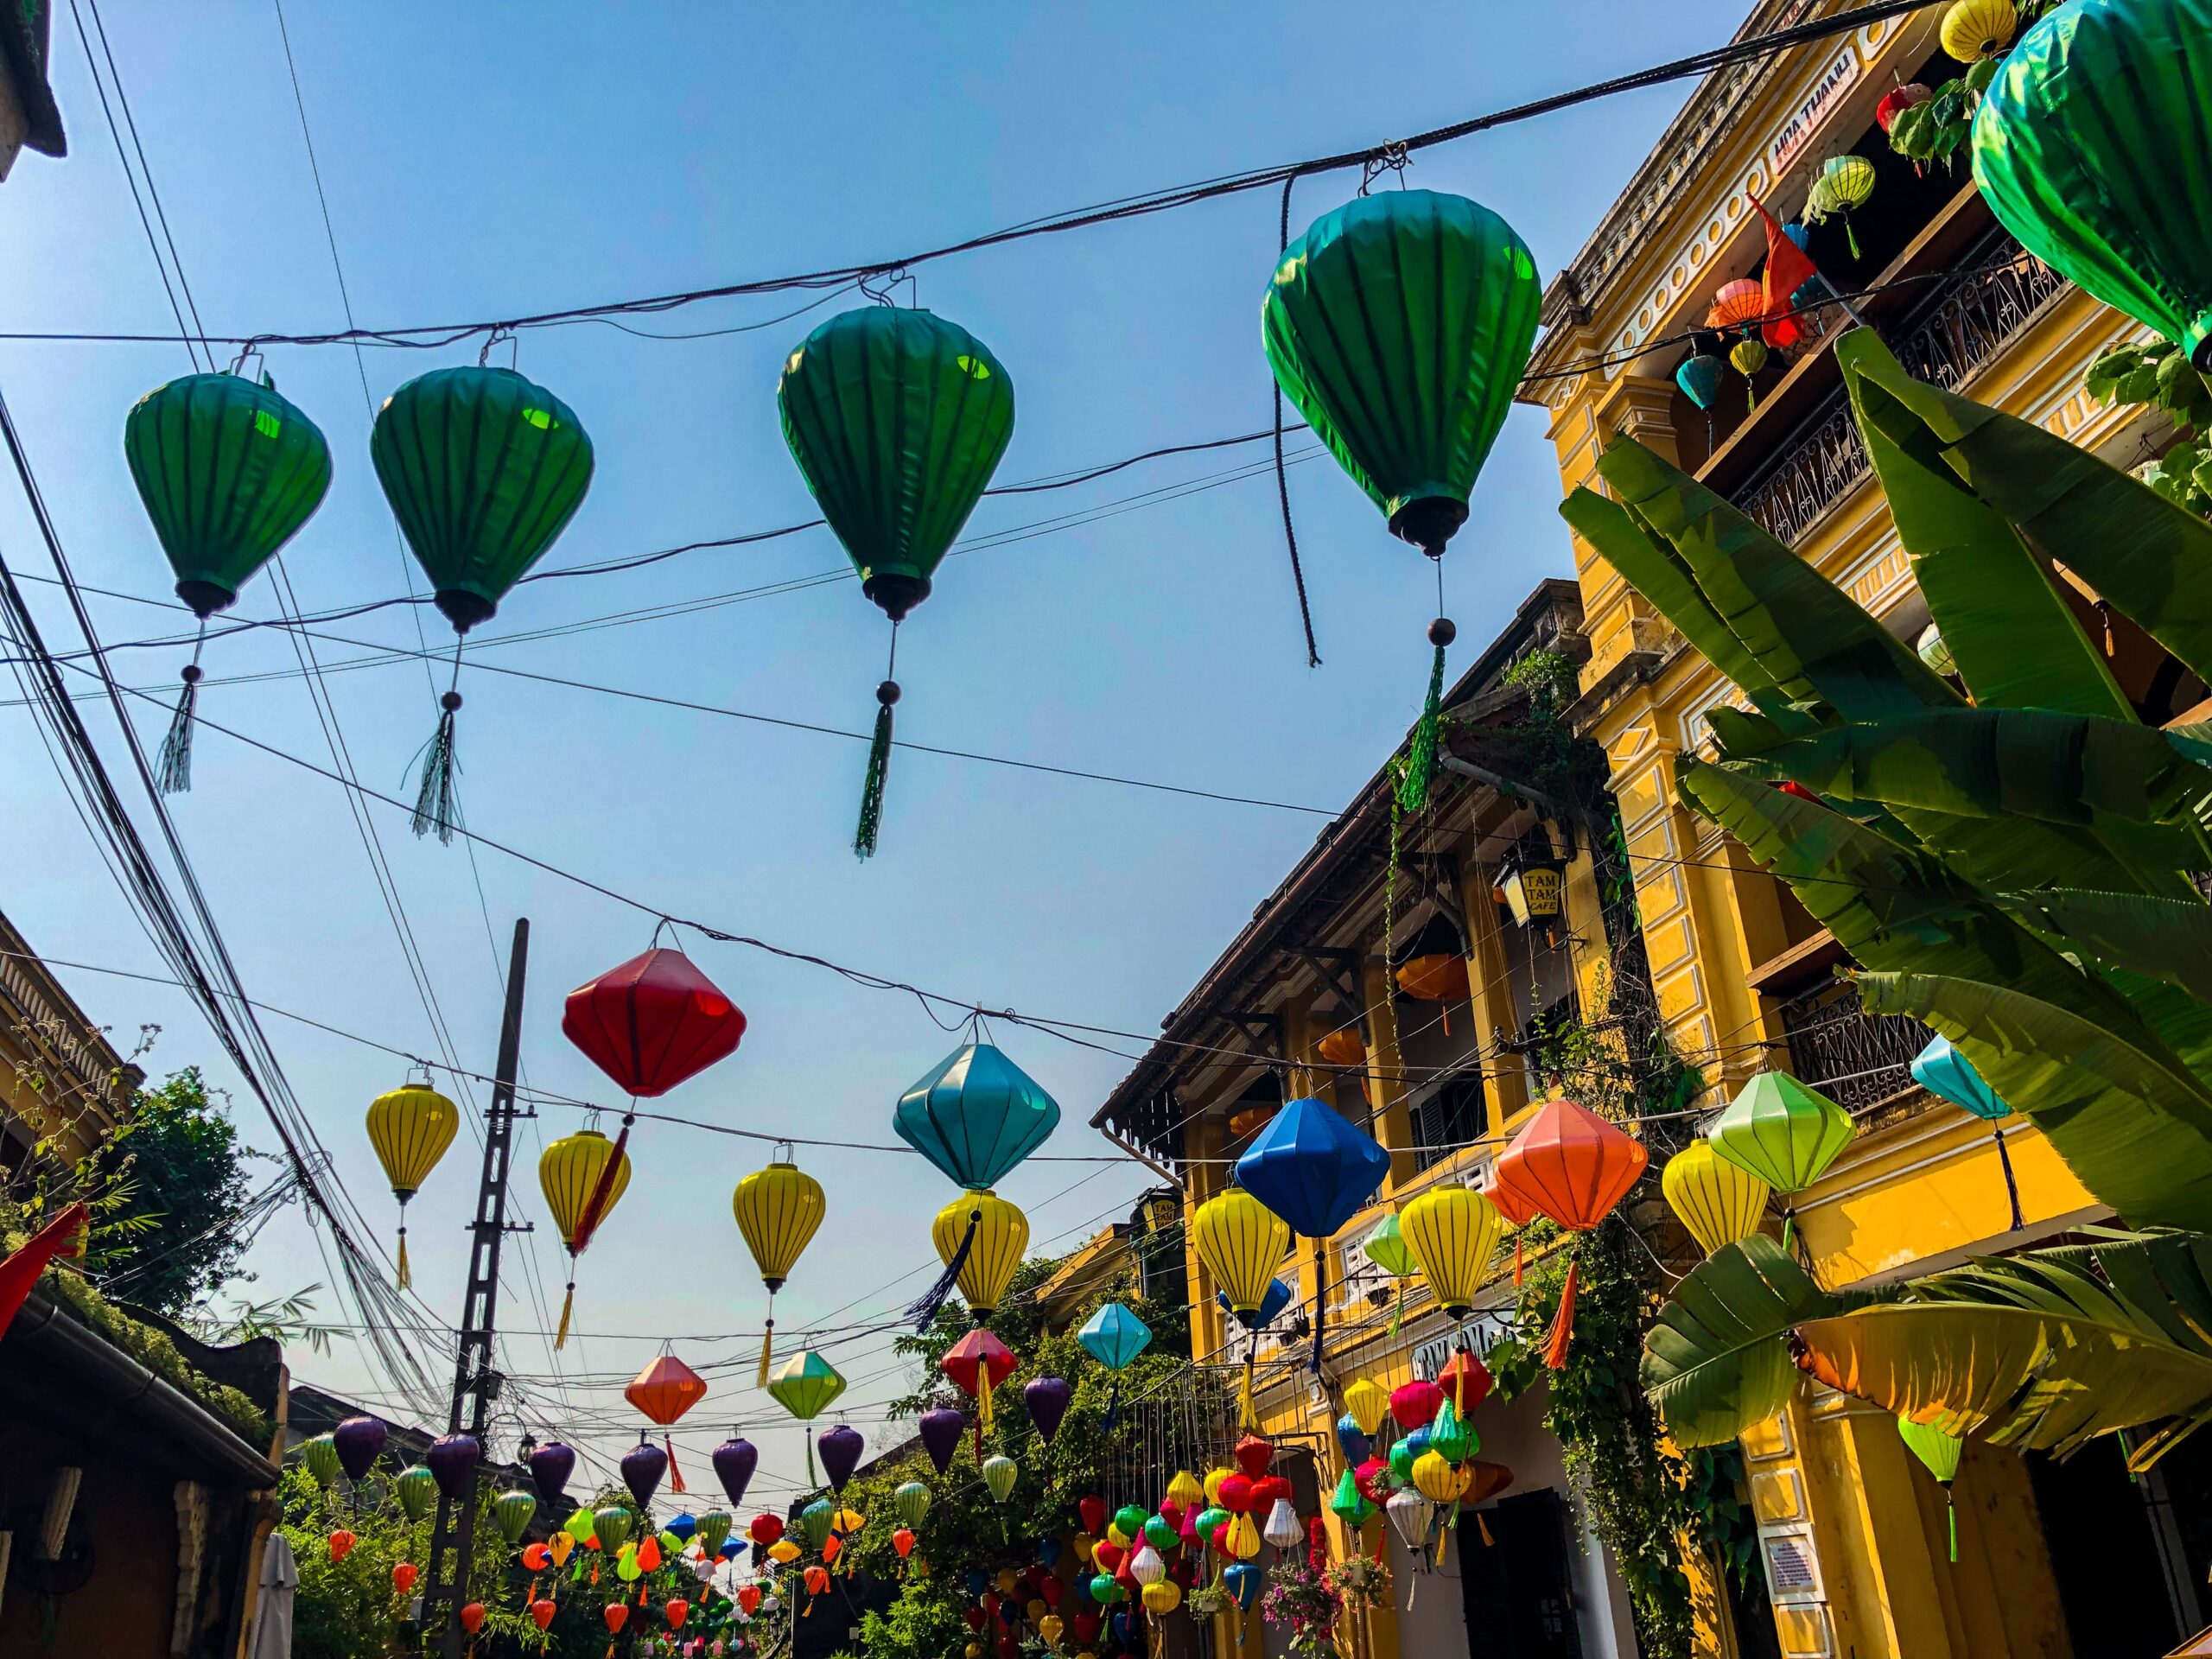 Colorful lanterns in Hoi An